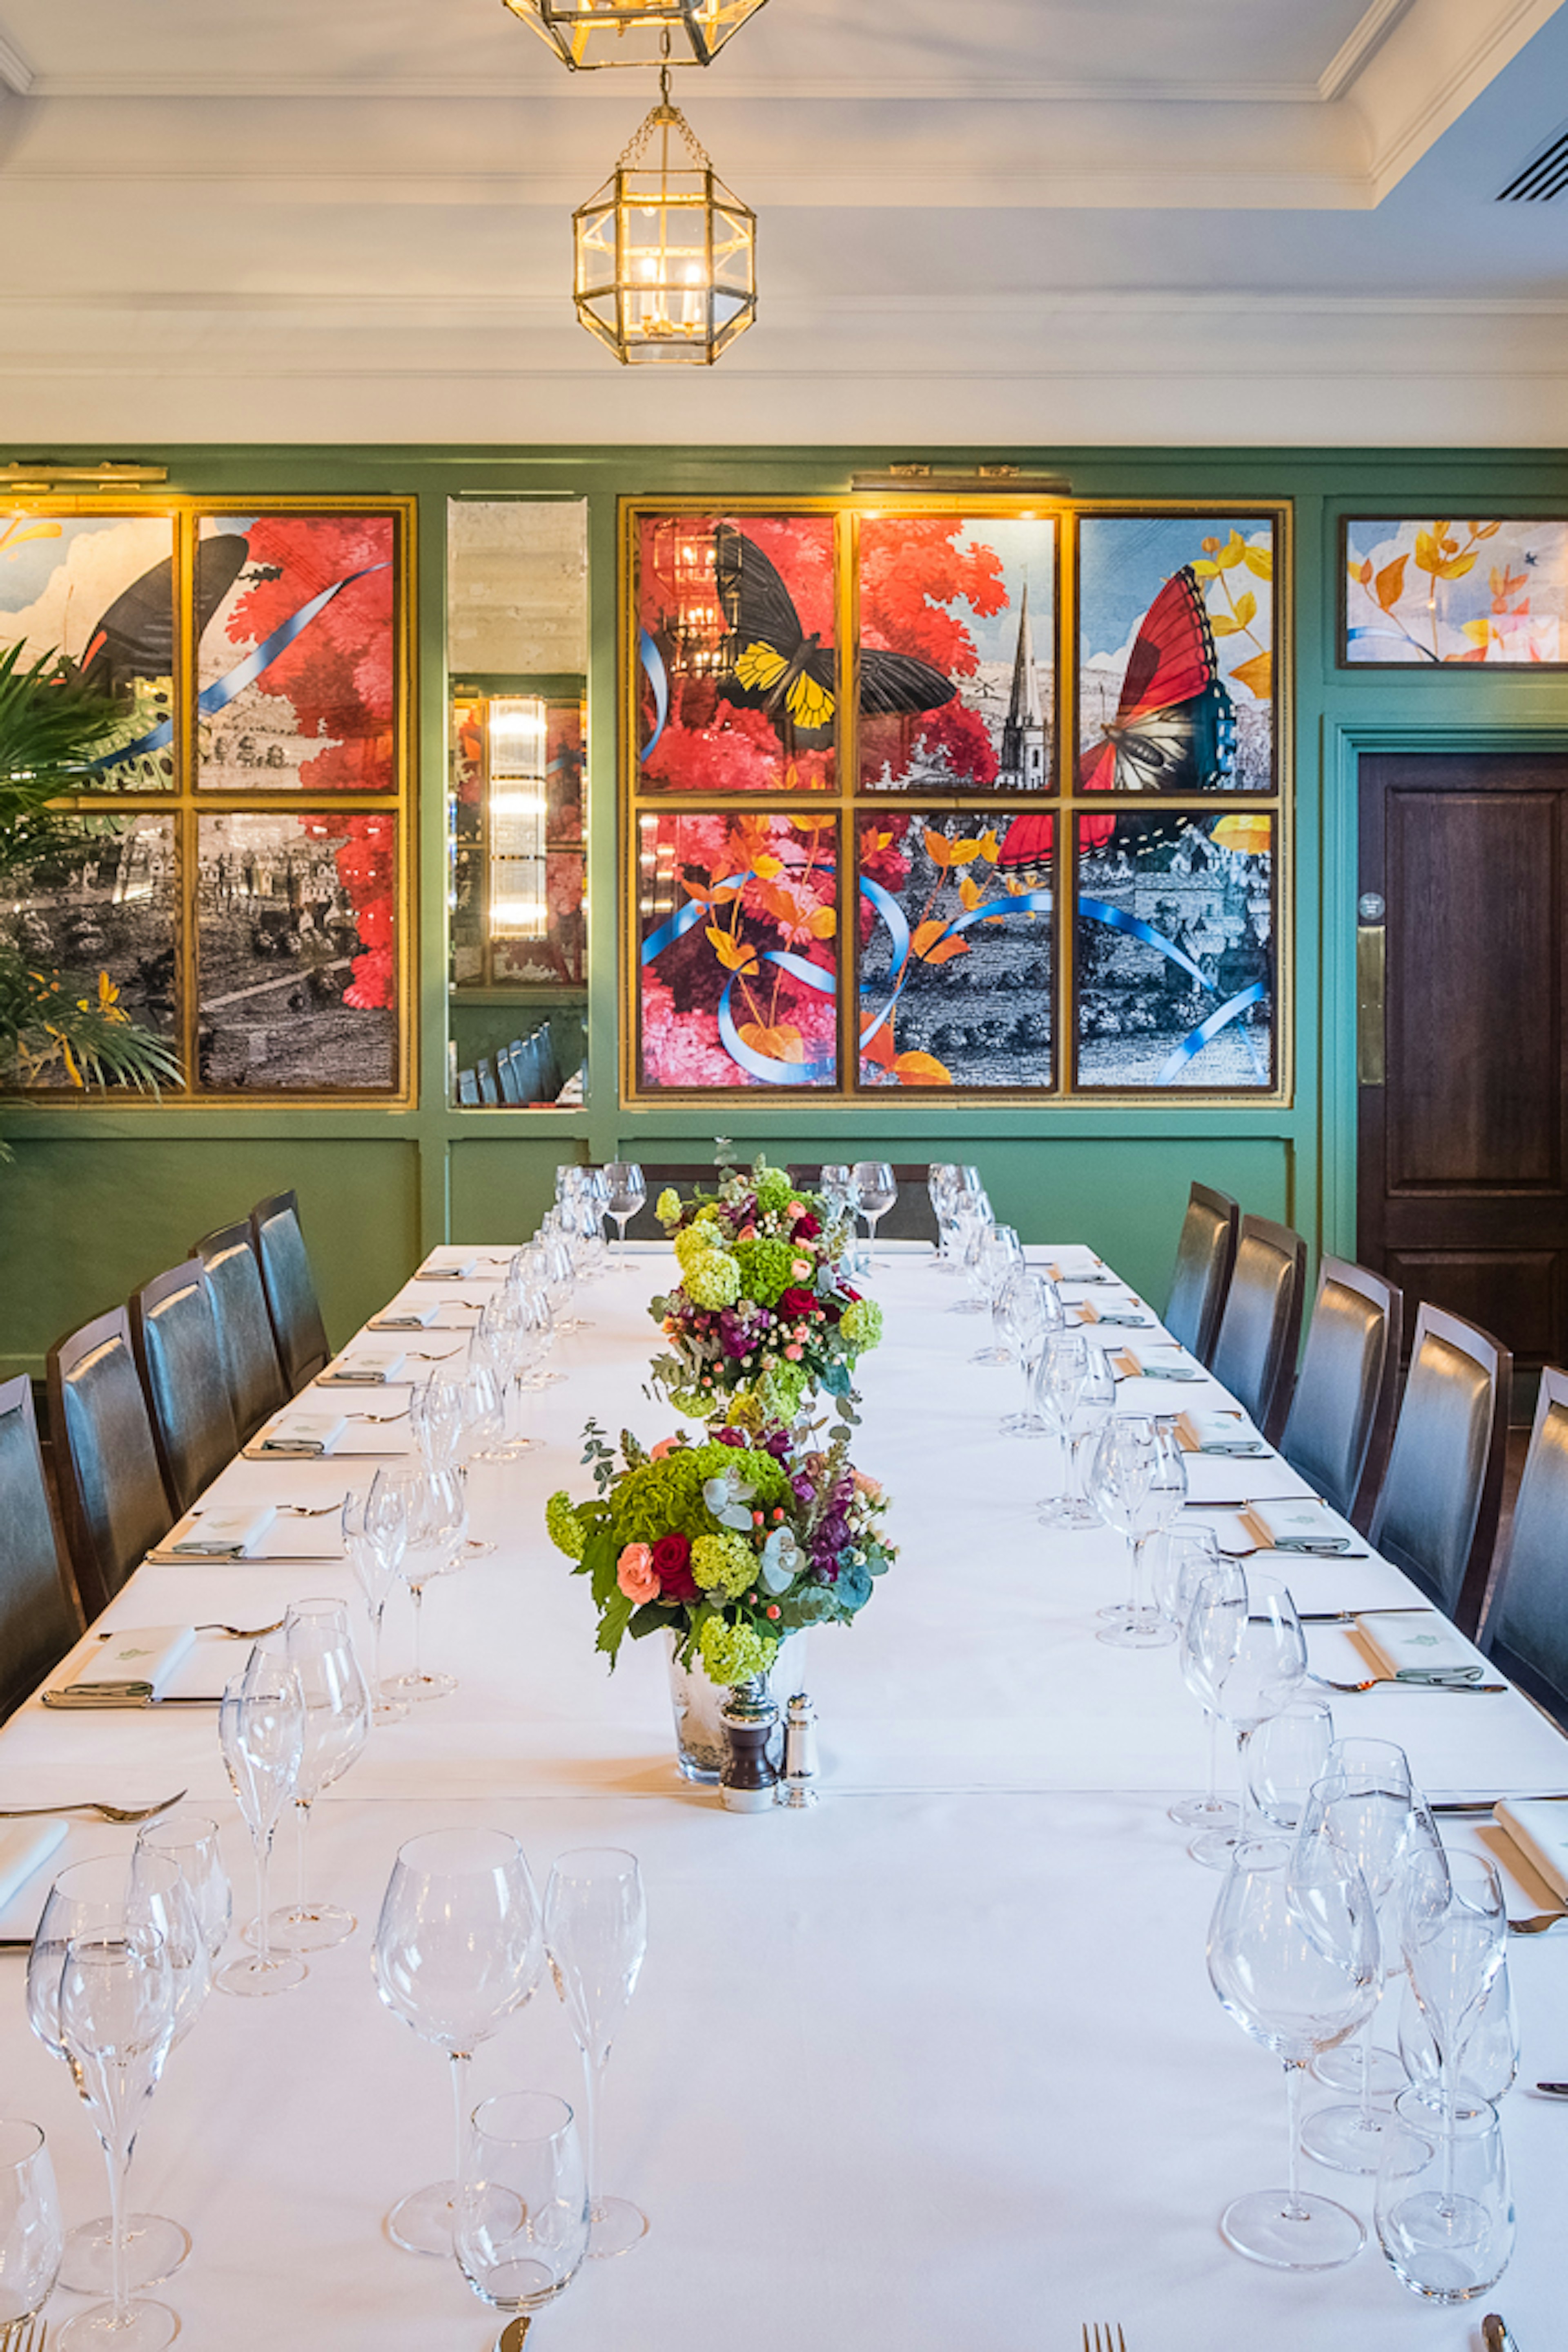 Dining  | The Archer Room